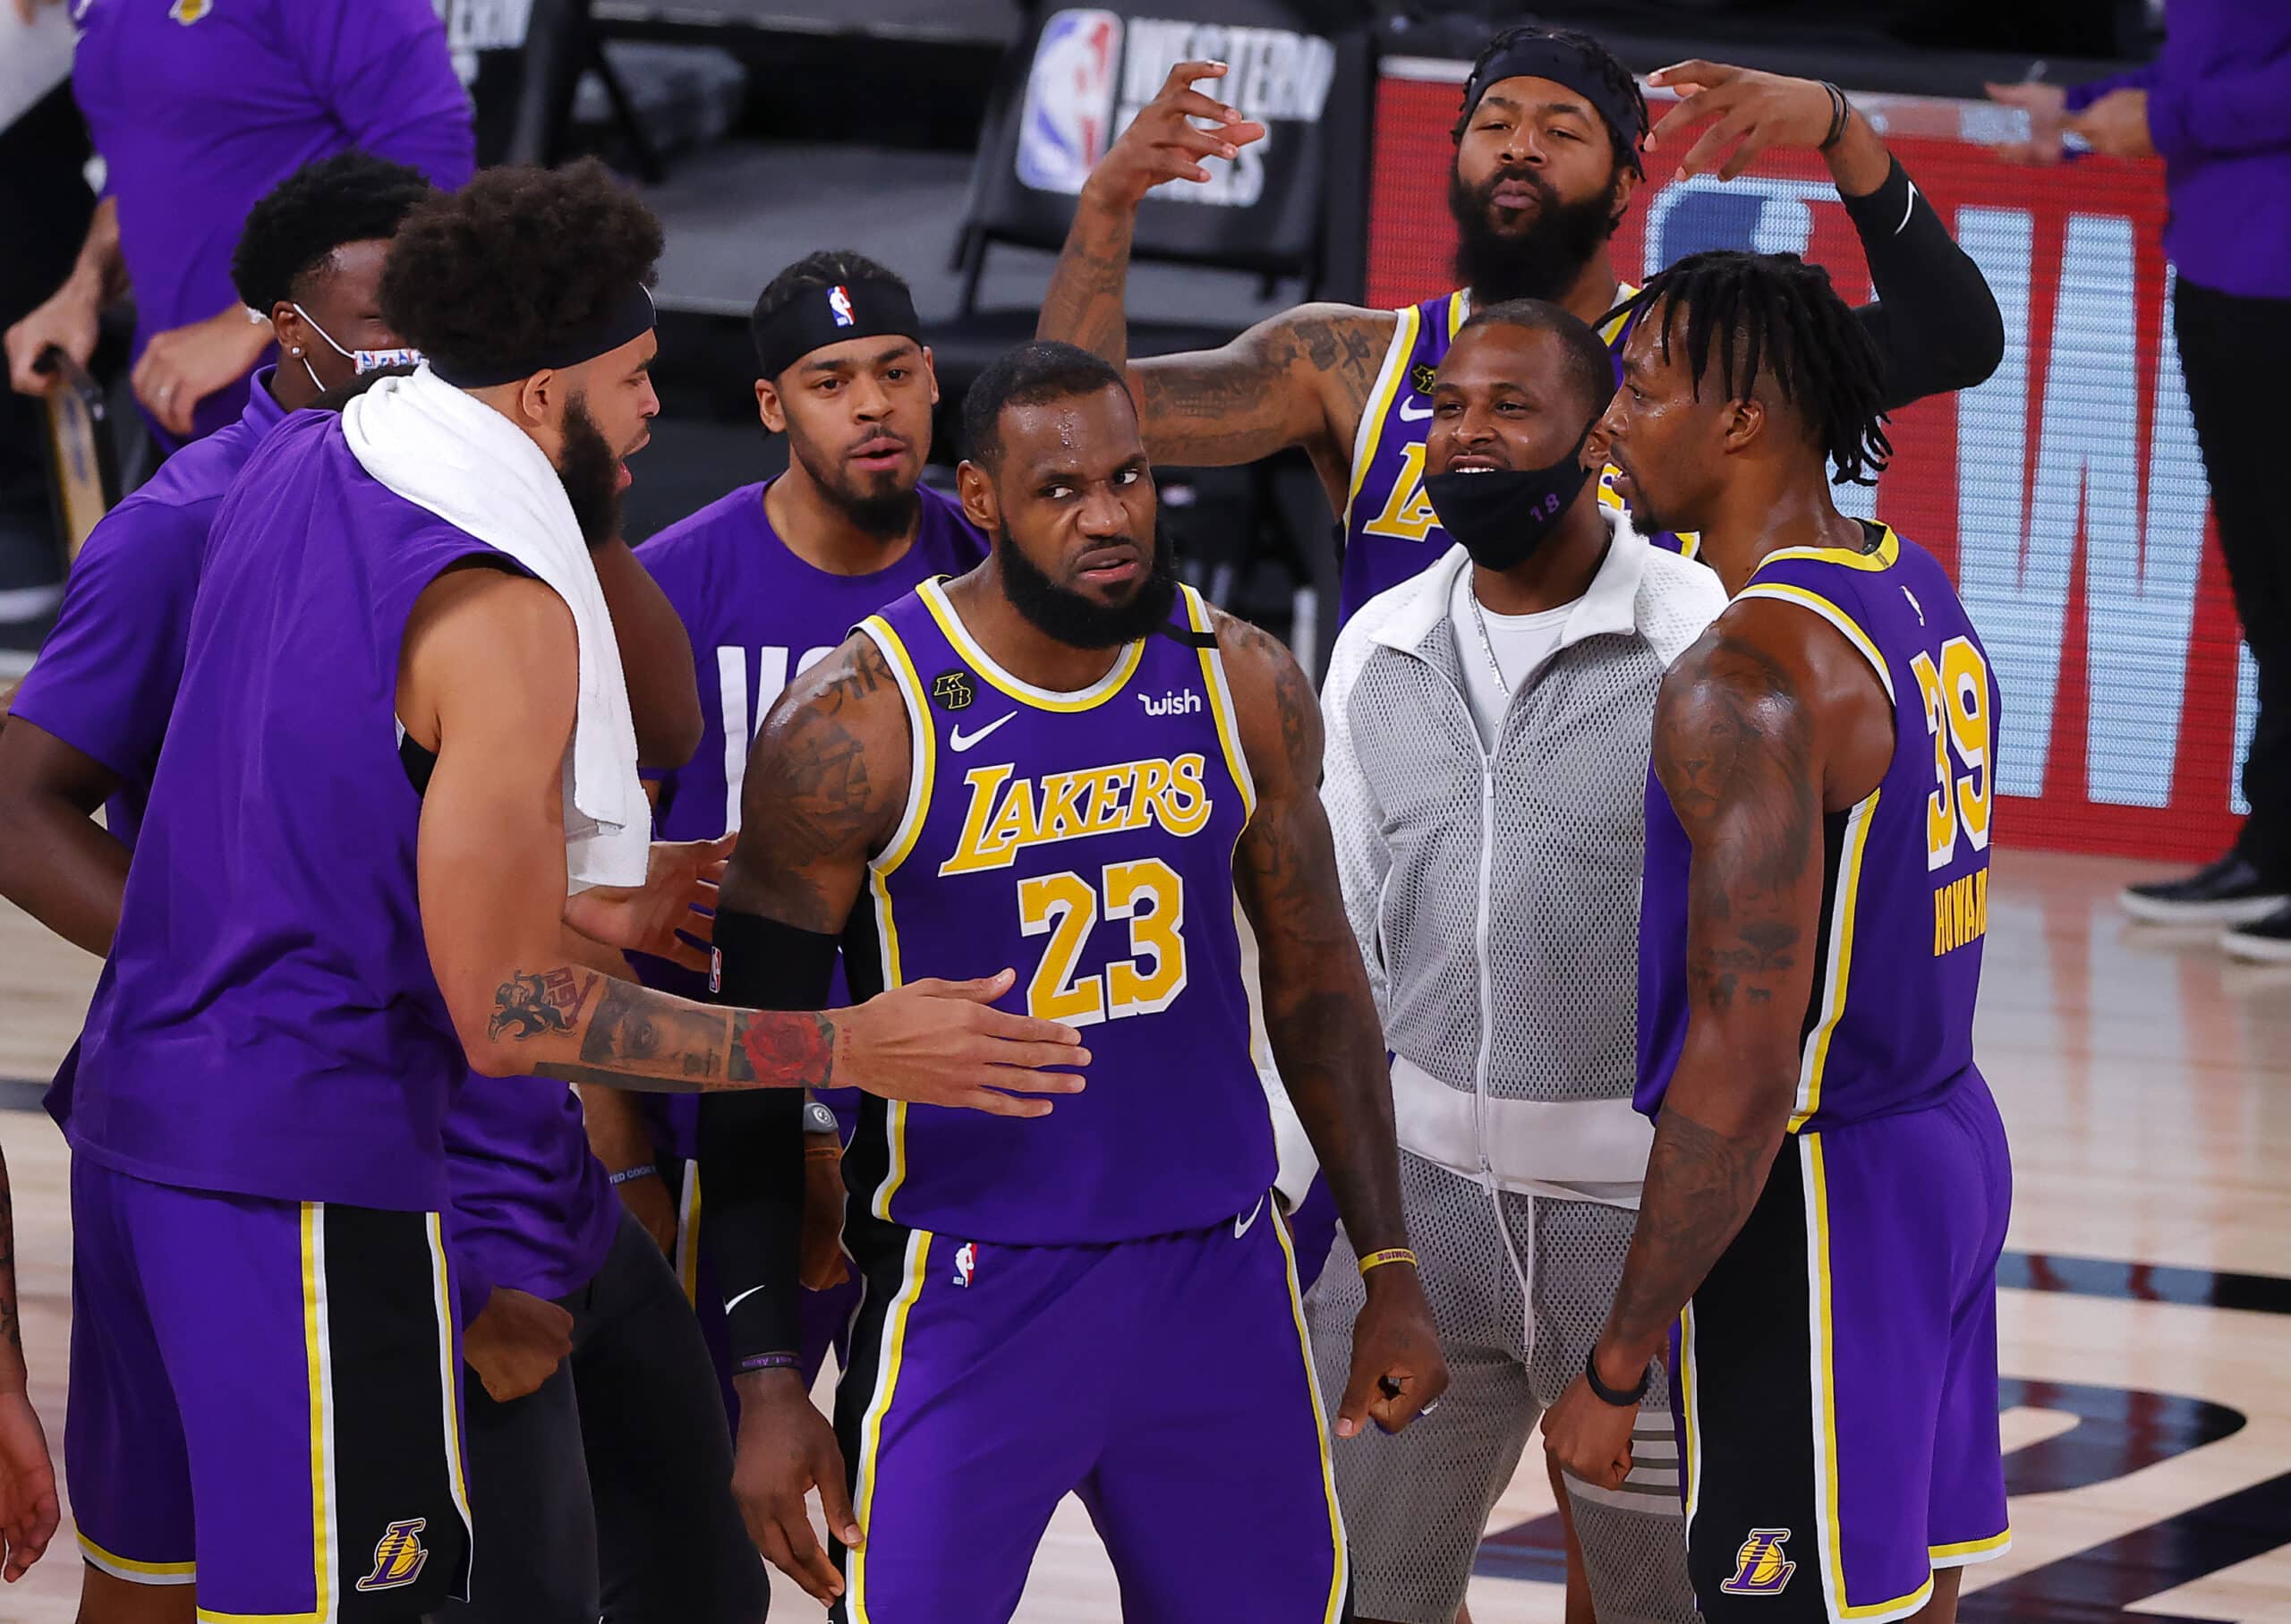 The Lakers are heading to the NBA Finals!